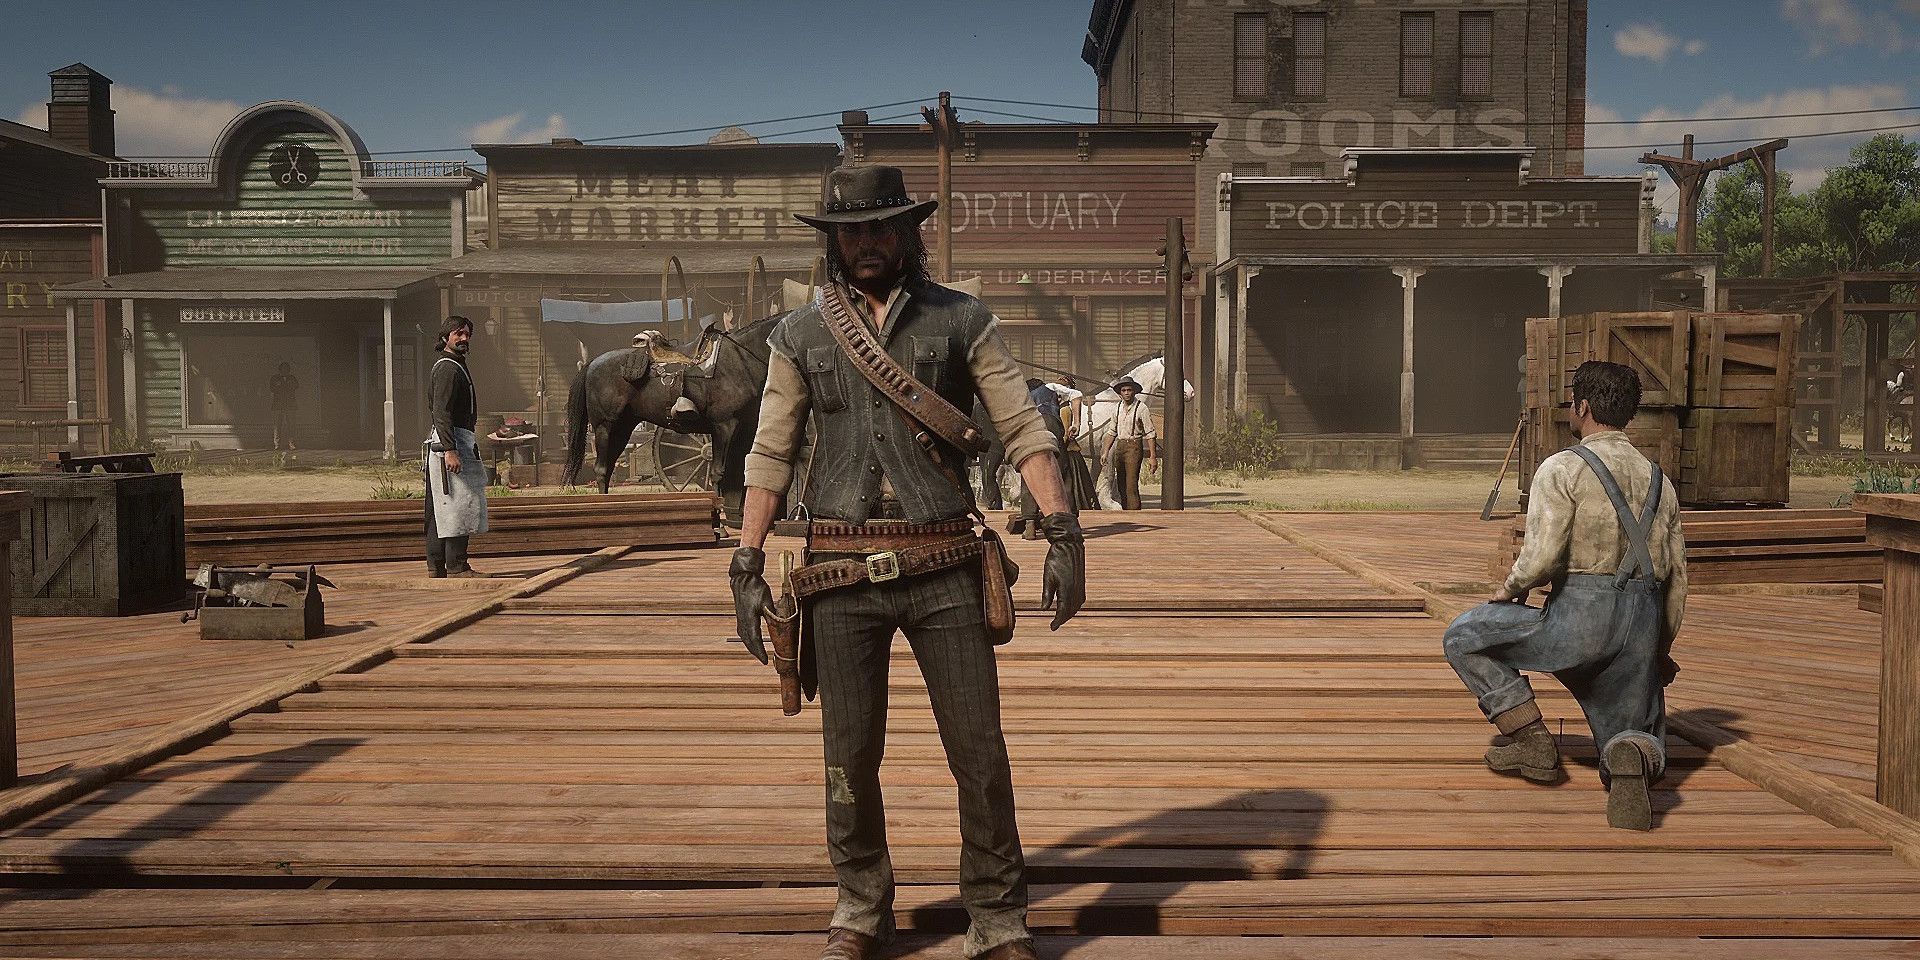 Rdr 2 Marston Arthur outfit. Rdr 2 outfits. Red Dead Redemption 2 Low Honor. РДР 2 outfits Low and High Honor. Пирсон рдр